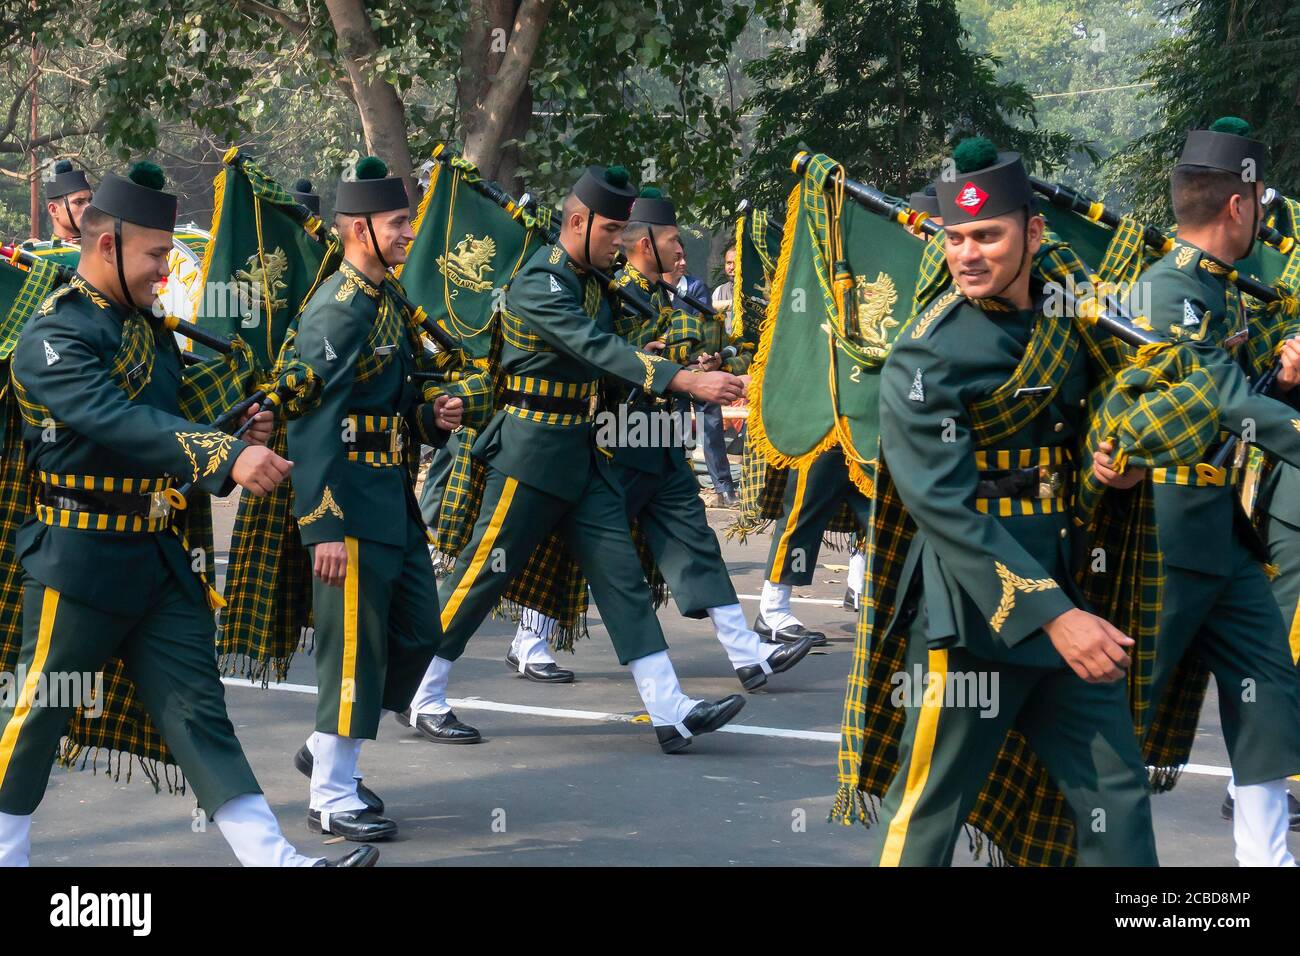 Kolkata, West Bengal, India - 26th January 2020 : Indian army Officers dressed as musical band, carrying musical instruments are marching past. Stock Photo